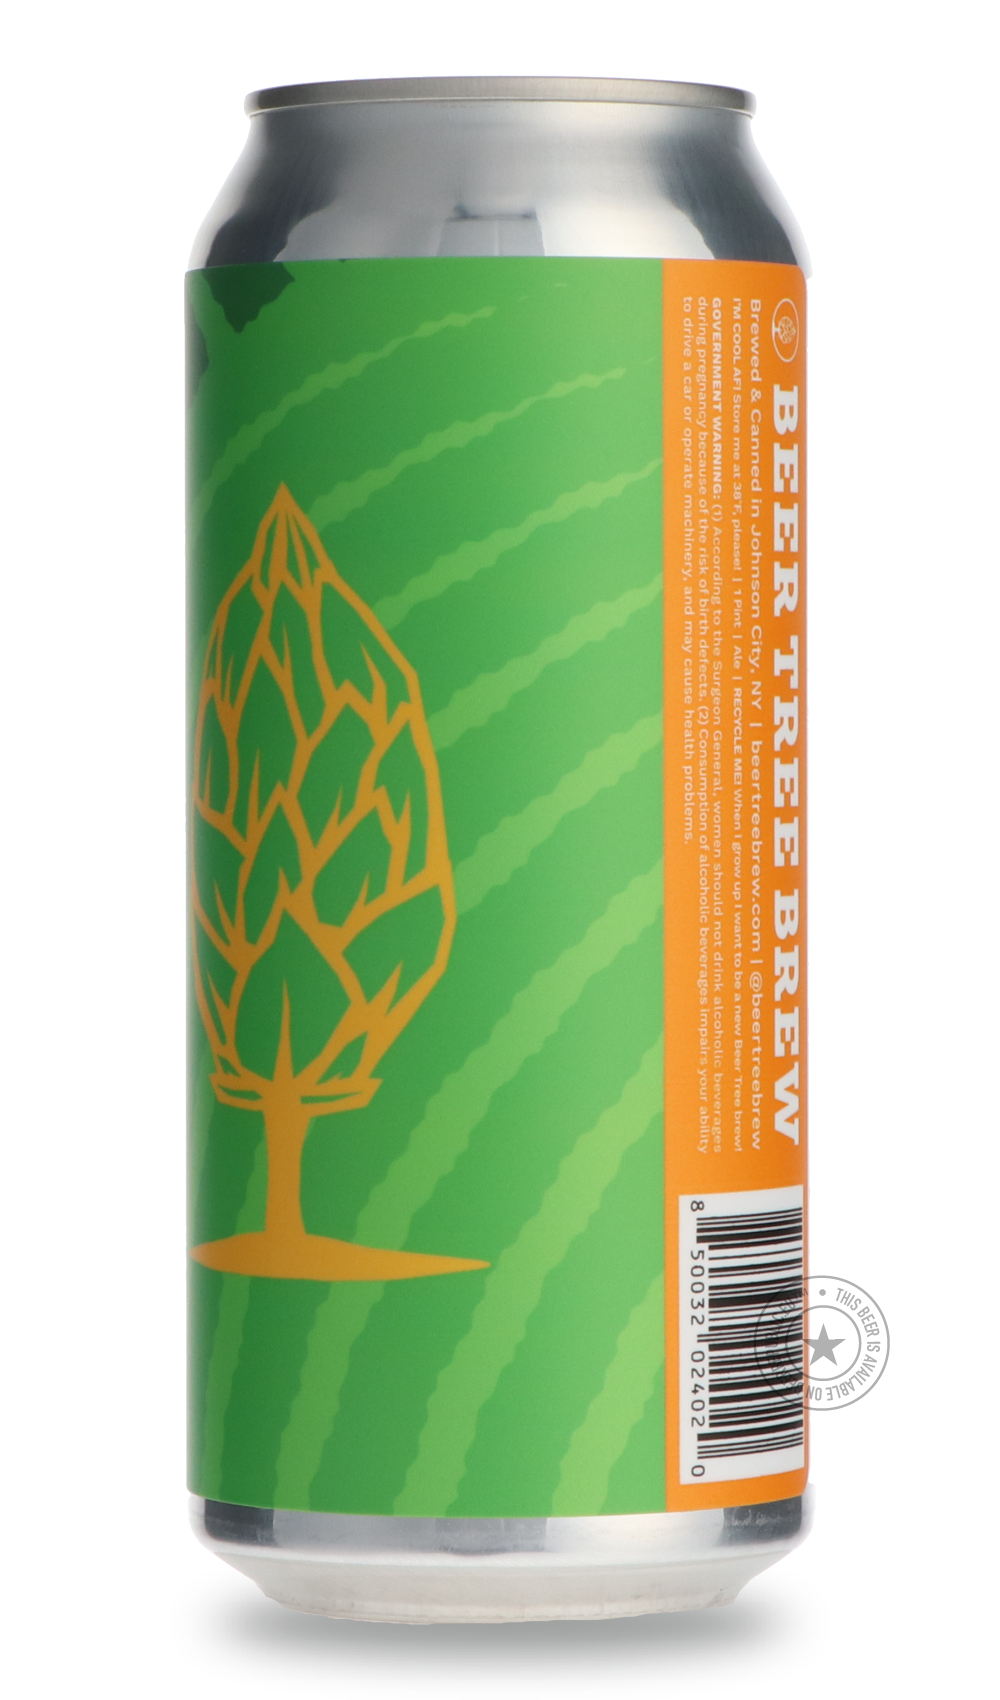 -Beer Tree- Citra Grove-IPA- Only @ Beer Republic - The best online beer store for American & Canadian craft beer - Buy beer online from the USA and Canada - Bier online kopen - Amerikaans bier kopen - Craft beer store - Craft beer kopen - Amerikanisch bier kaufen - Bier online kaufen - Acheter biere online - IPA - Stout - Porter - New England IPA - Hazy IPA - Imperial Stout - Barrel Aged - Barrel Aged Imperial Stout - Brown - Dark beer - Blond - Blonde - Pilsner - Lager - Wheat - Weizen - Amber - Barley Wi